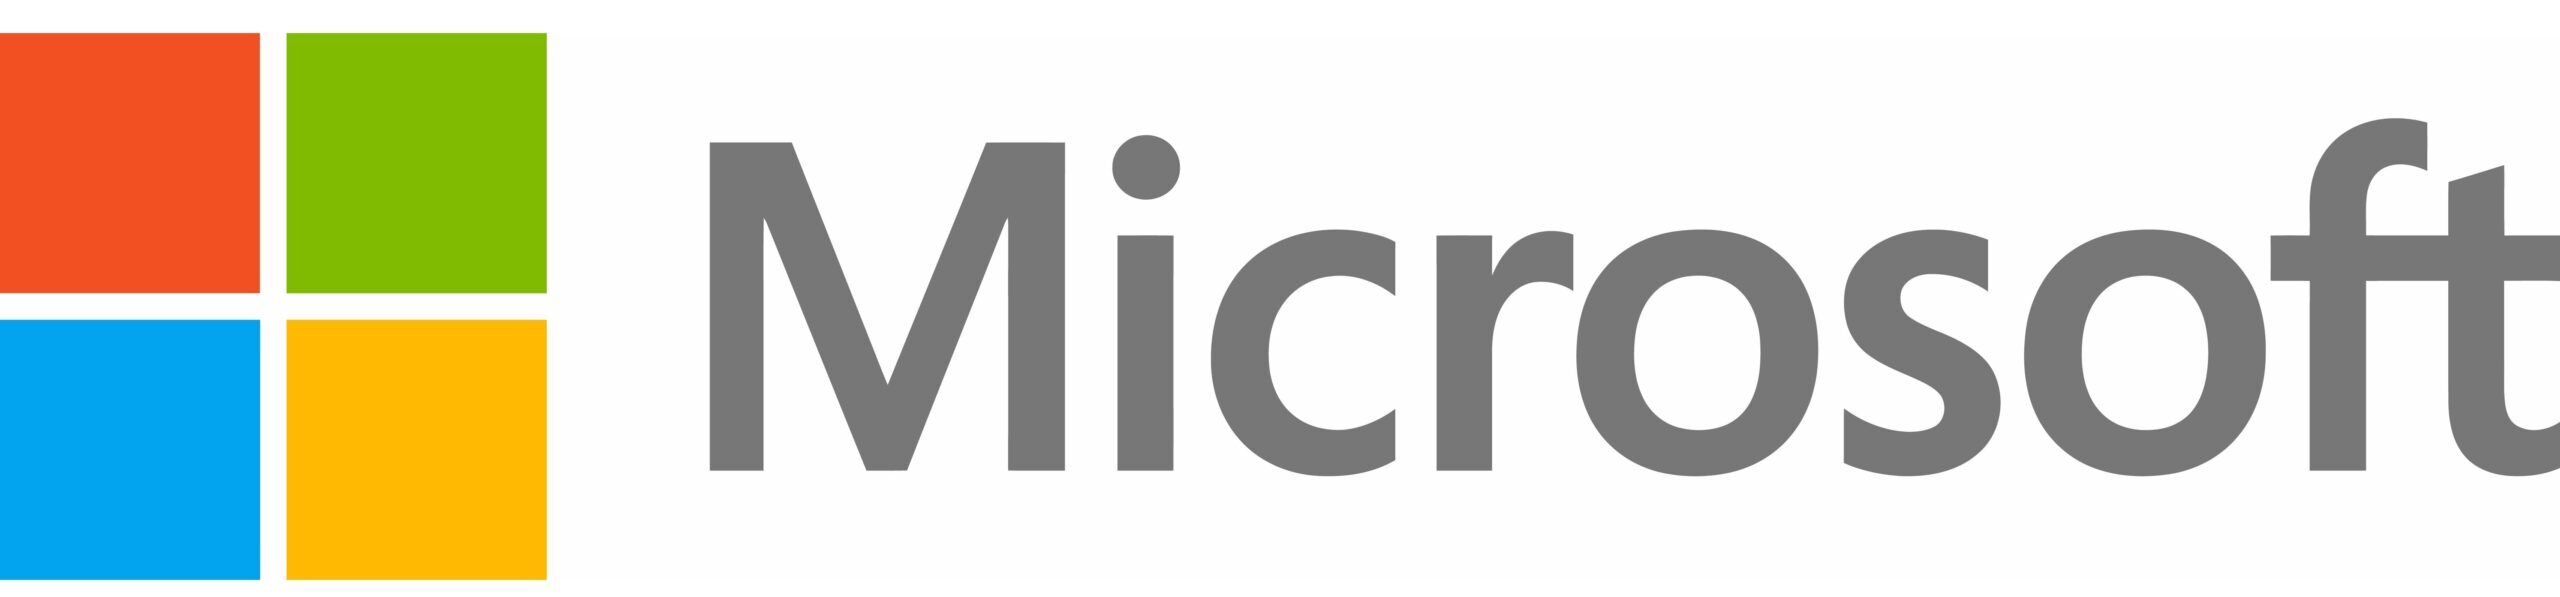 Microsoft's logo, an American multinational corporation and technology company.